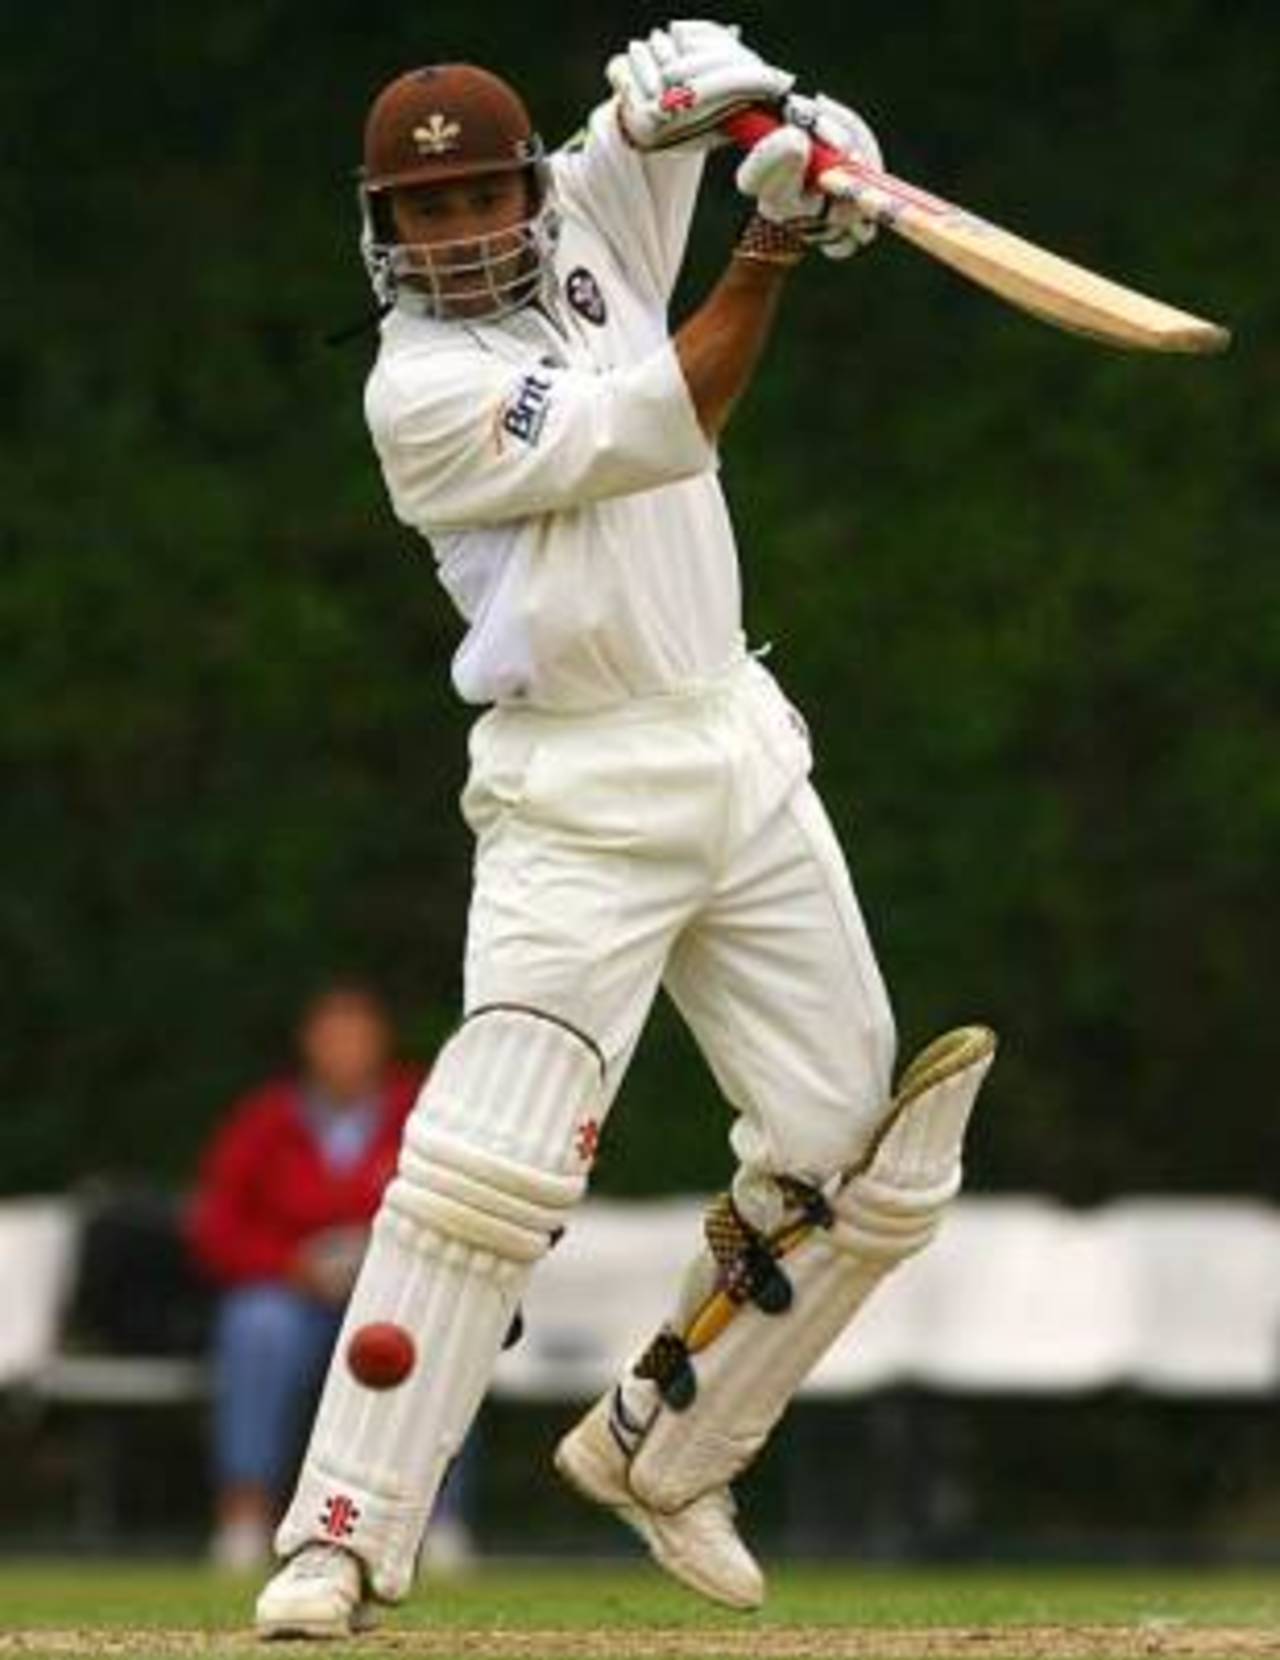 Mark Ramprakash drives square during his century, Surrey v Worcestershire, County Championship, Guildford, July 26, 2007